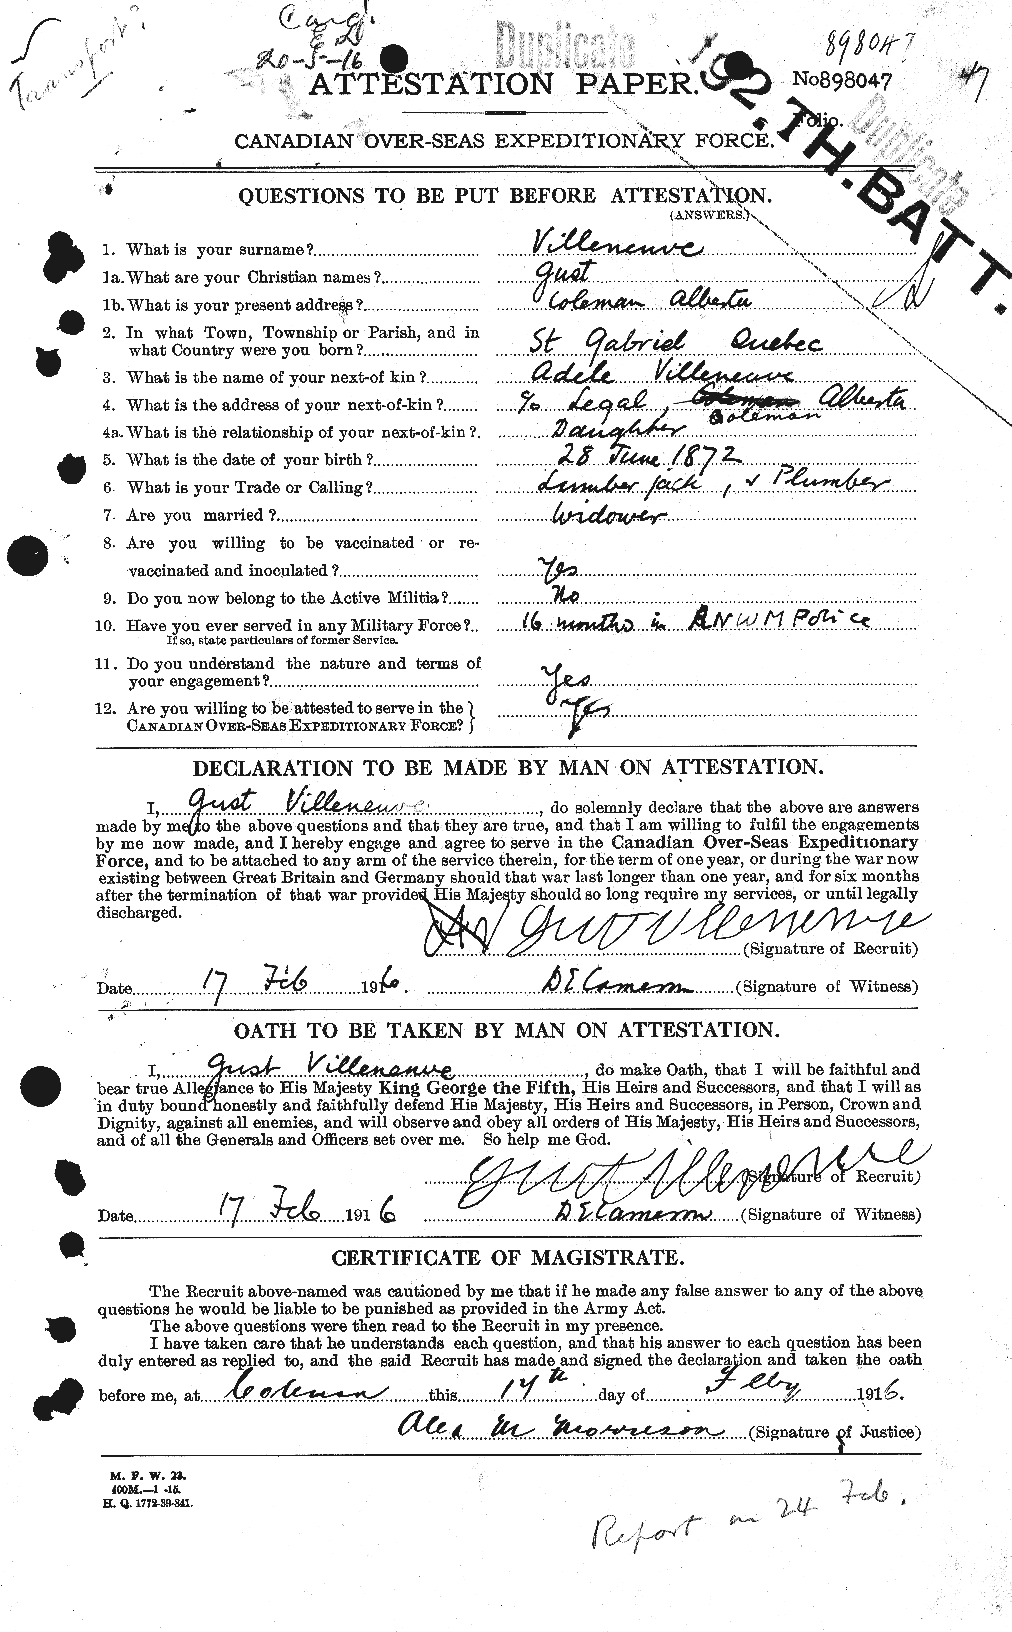 Personnel Records of the First World War - CEF 653832a